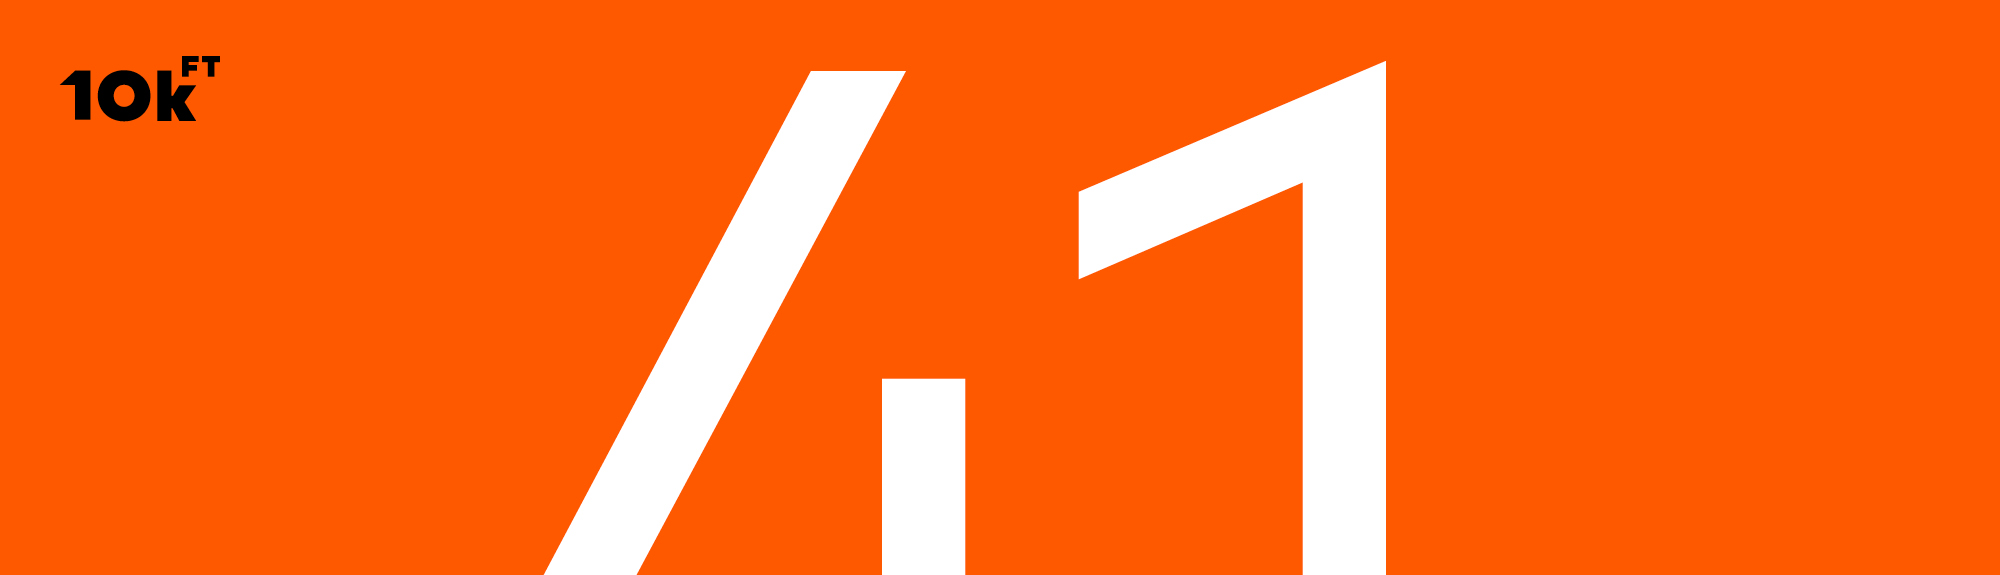 Orange image with center text reads “41”.